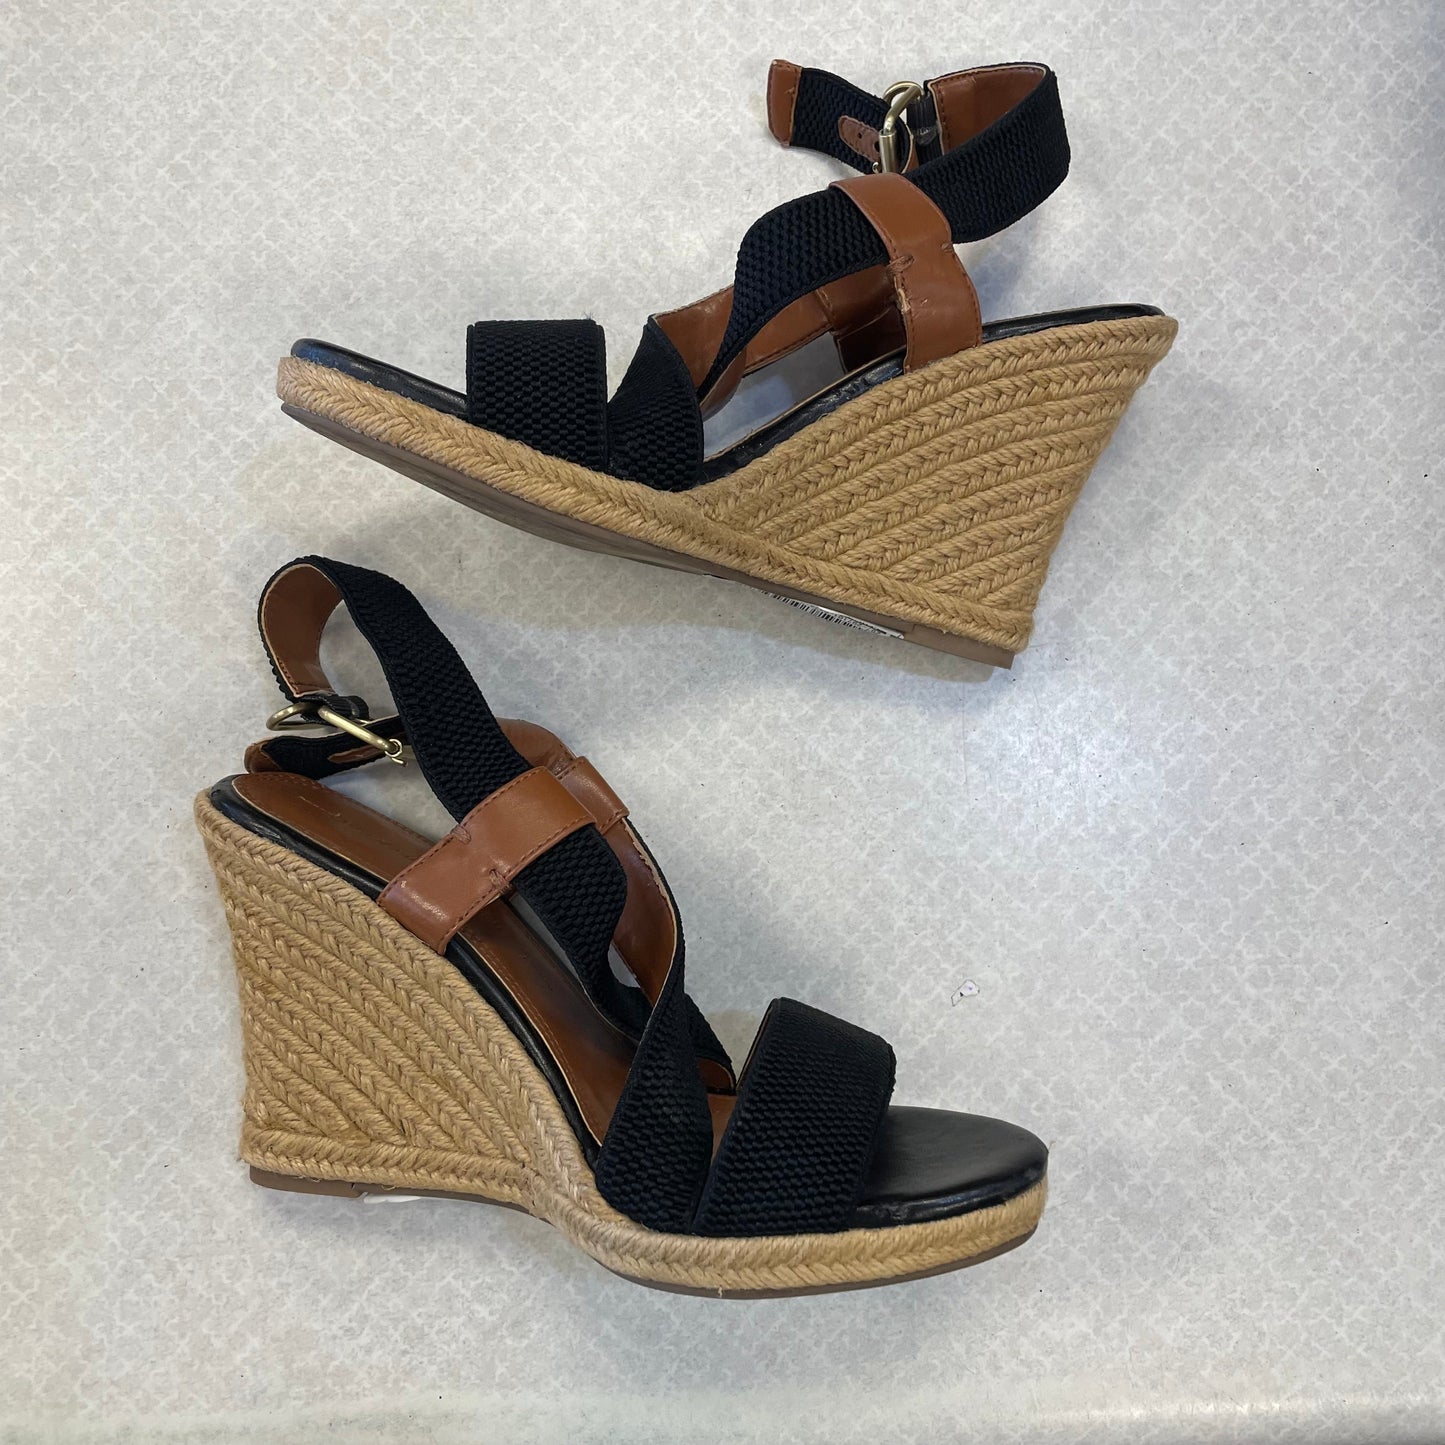 Shoes Heels Wedge By Banana Republic  Size: 7.5